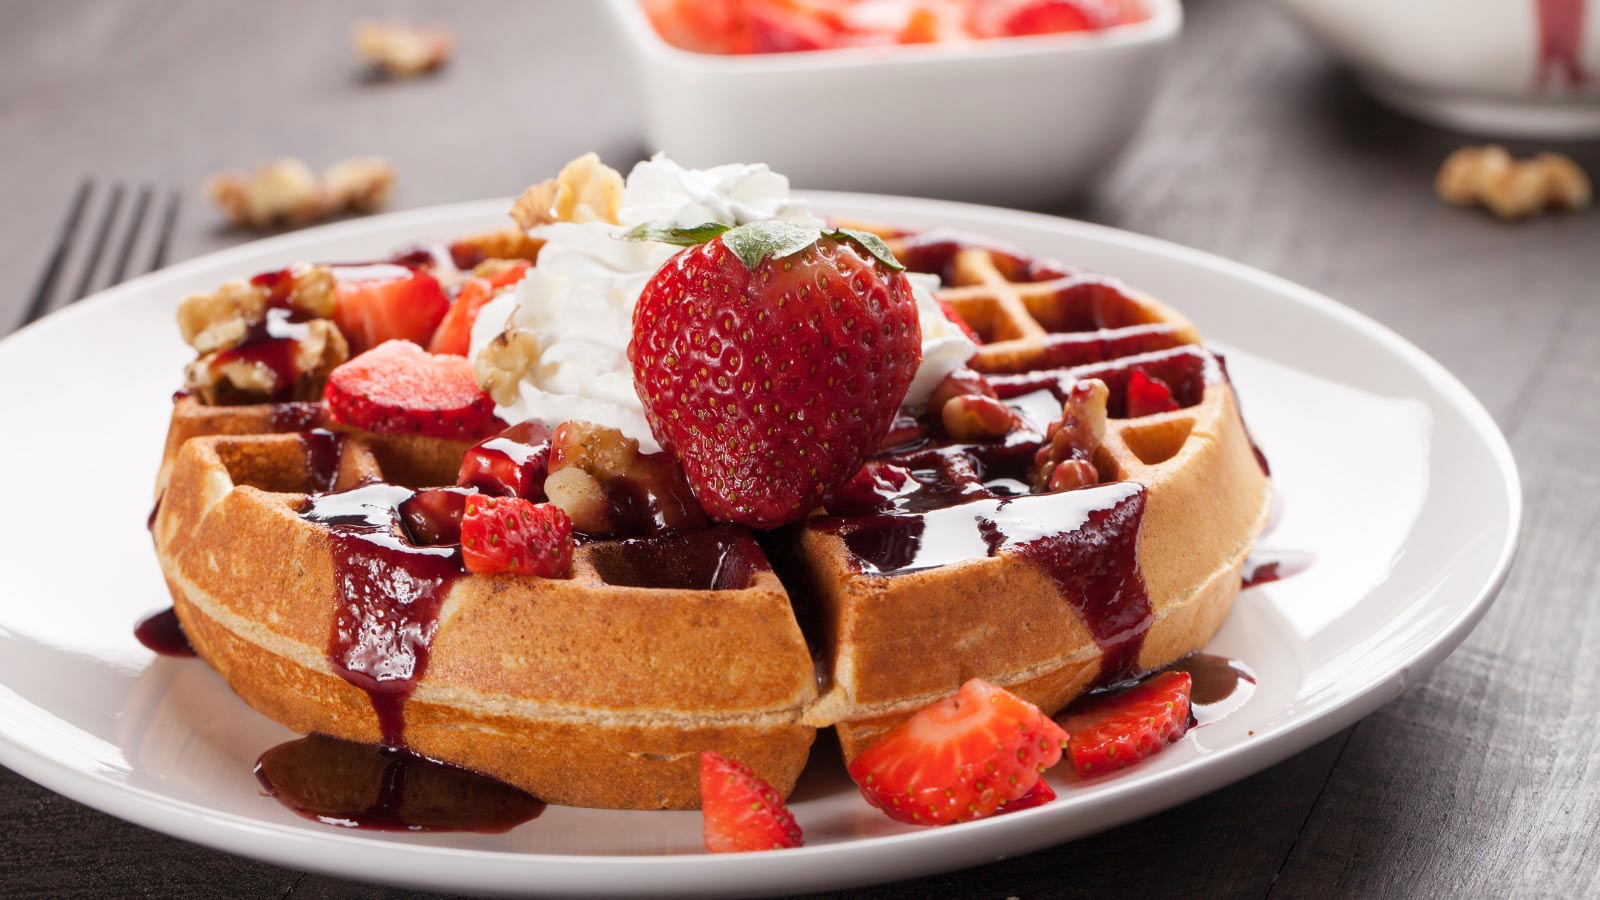 Belgium waffle topped with boysenberry syrup, whipped cream, walnuts, and freshly chopped strawberries.